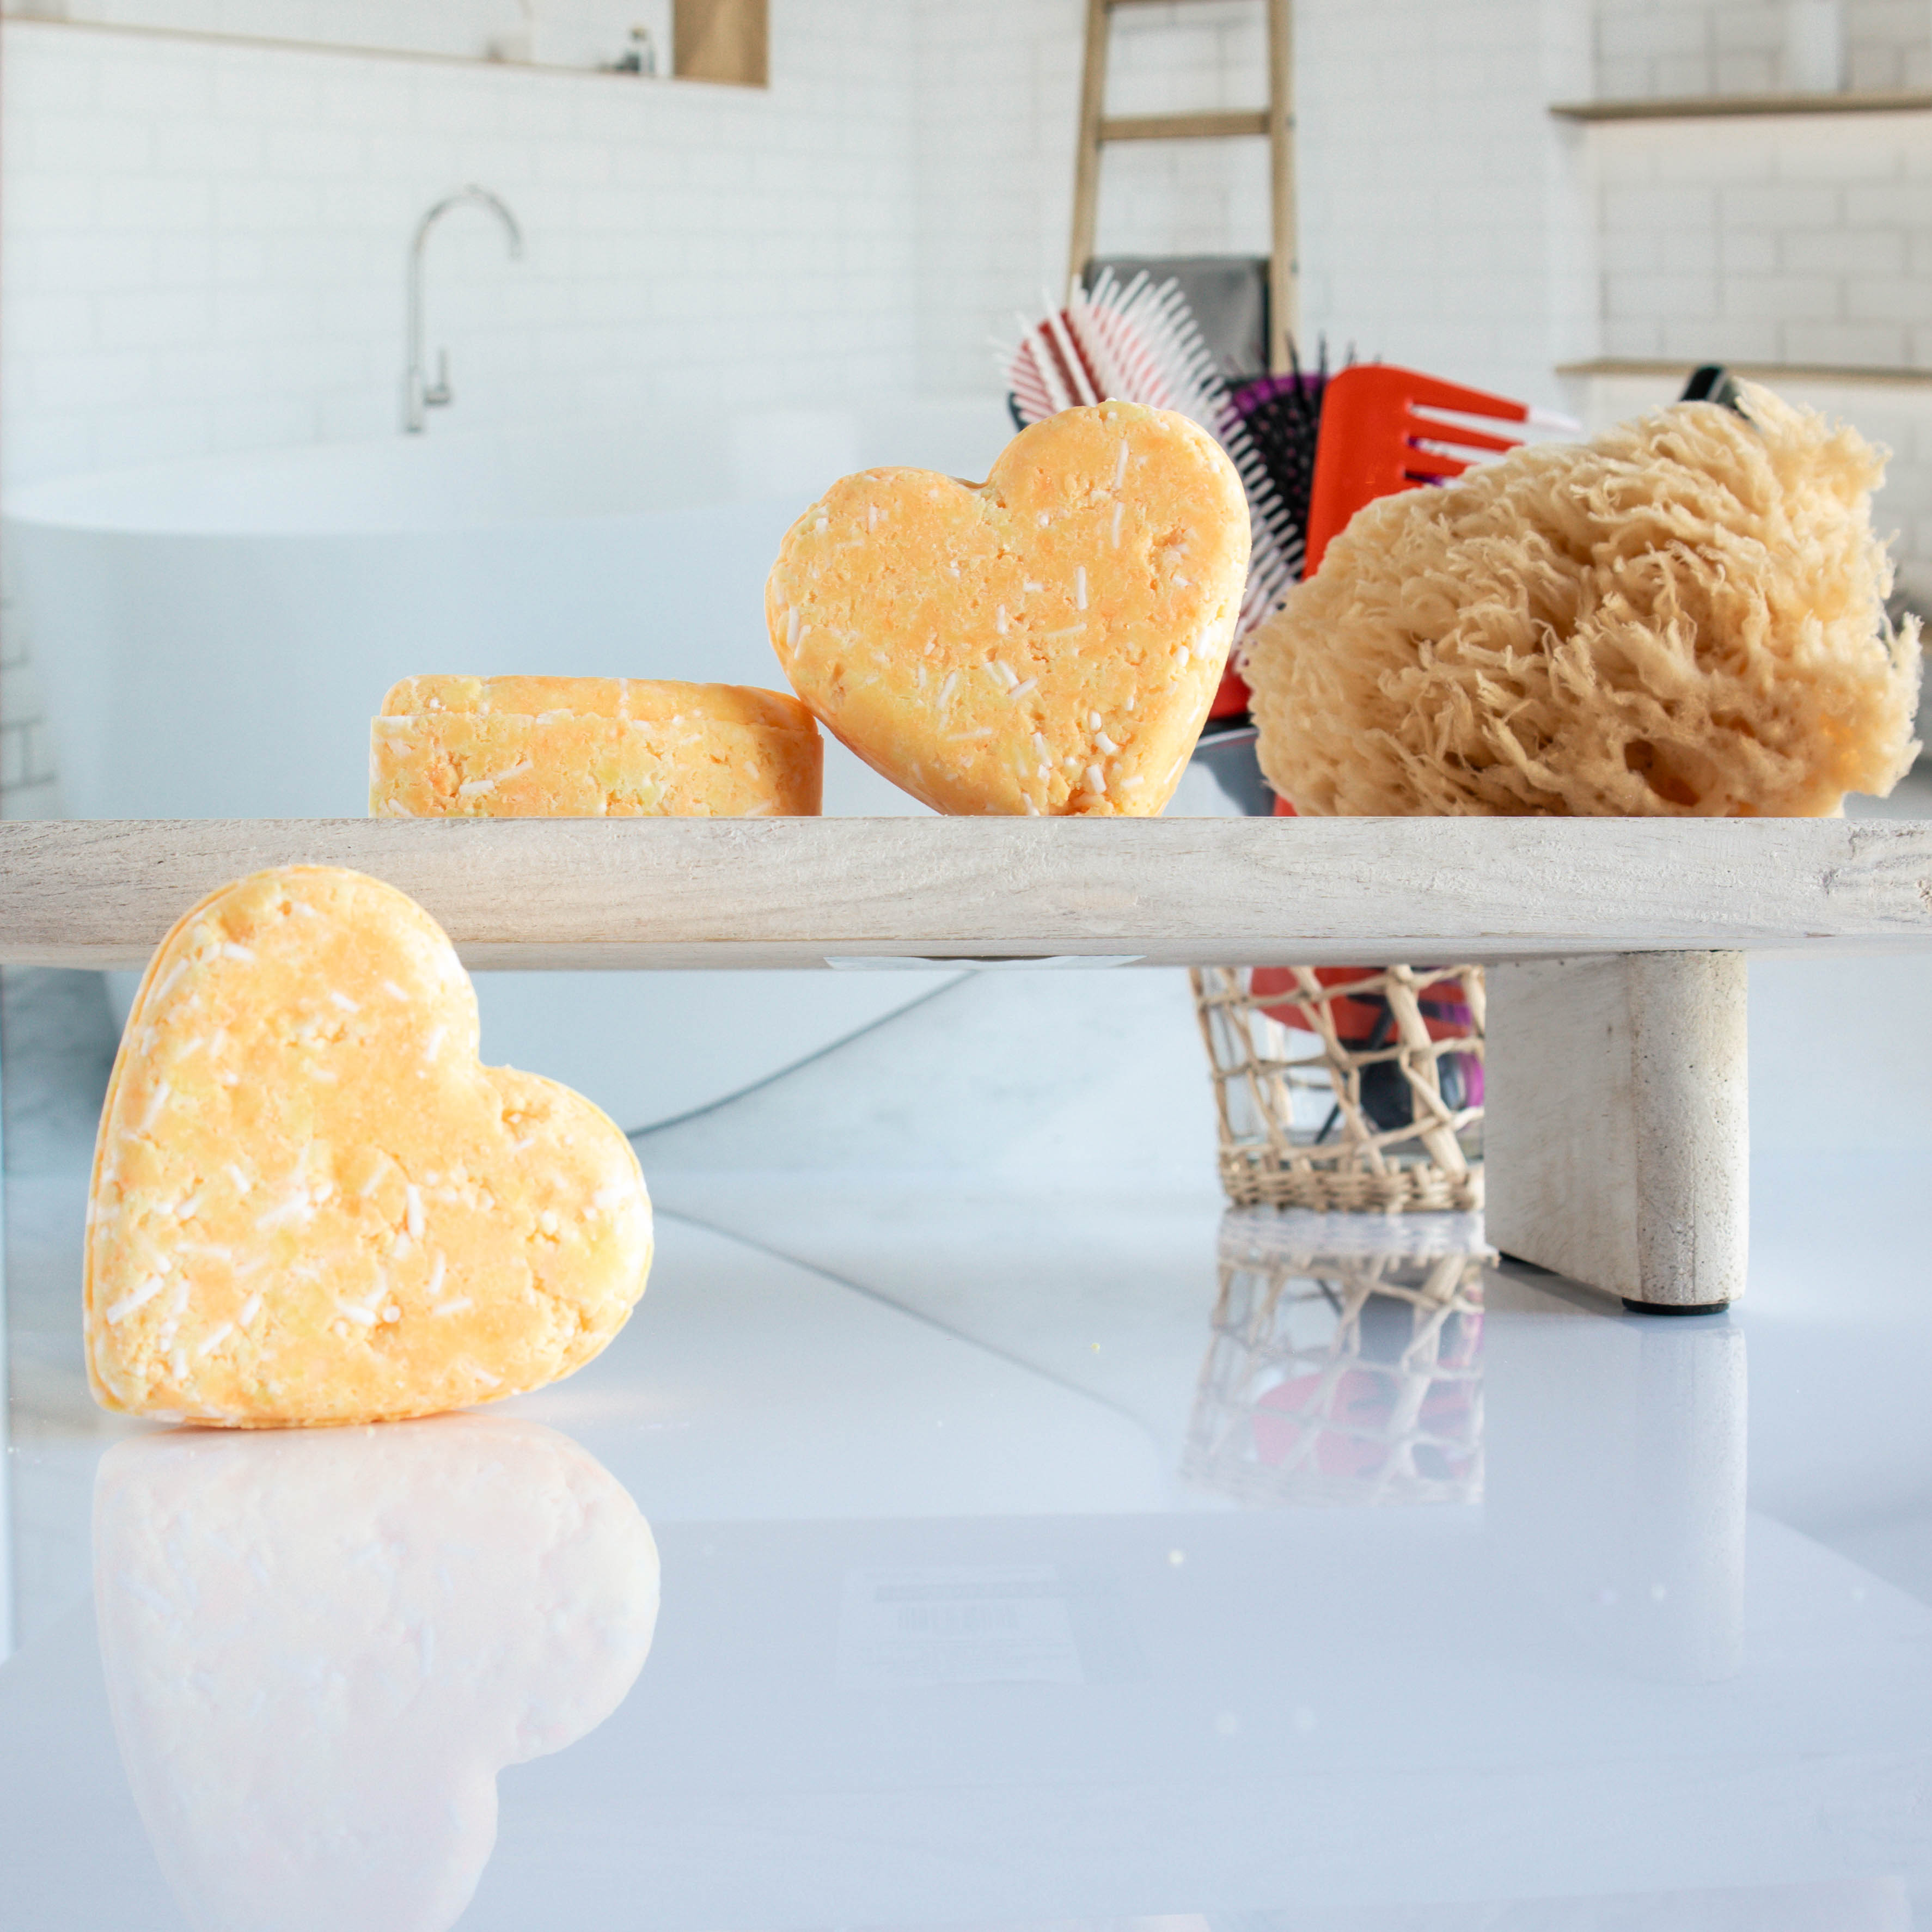 3 light orange harmony shampoo bars shaped in a heart. One is leaning on its side while the other two are on a trey, one leaning on the other. there is a loofah next to them with a cup of hair tools in the background